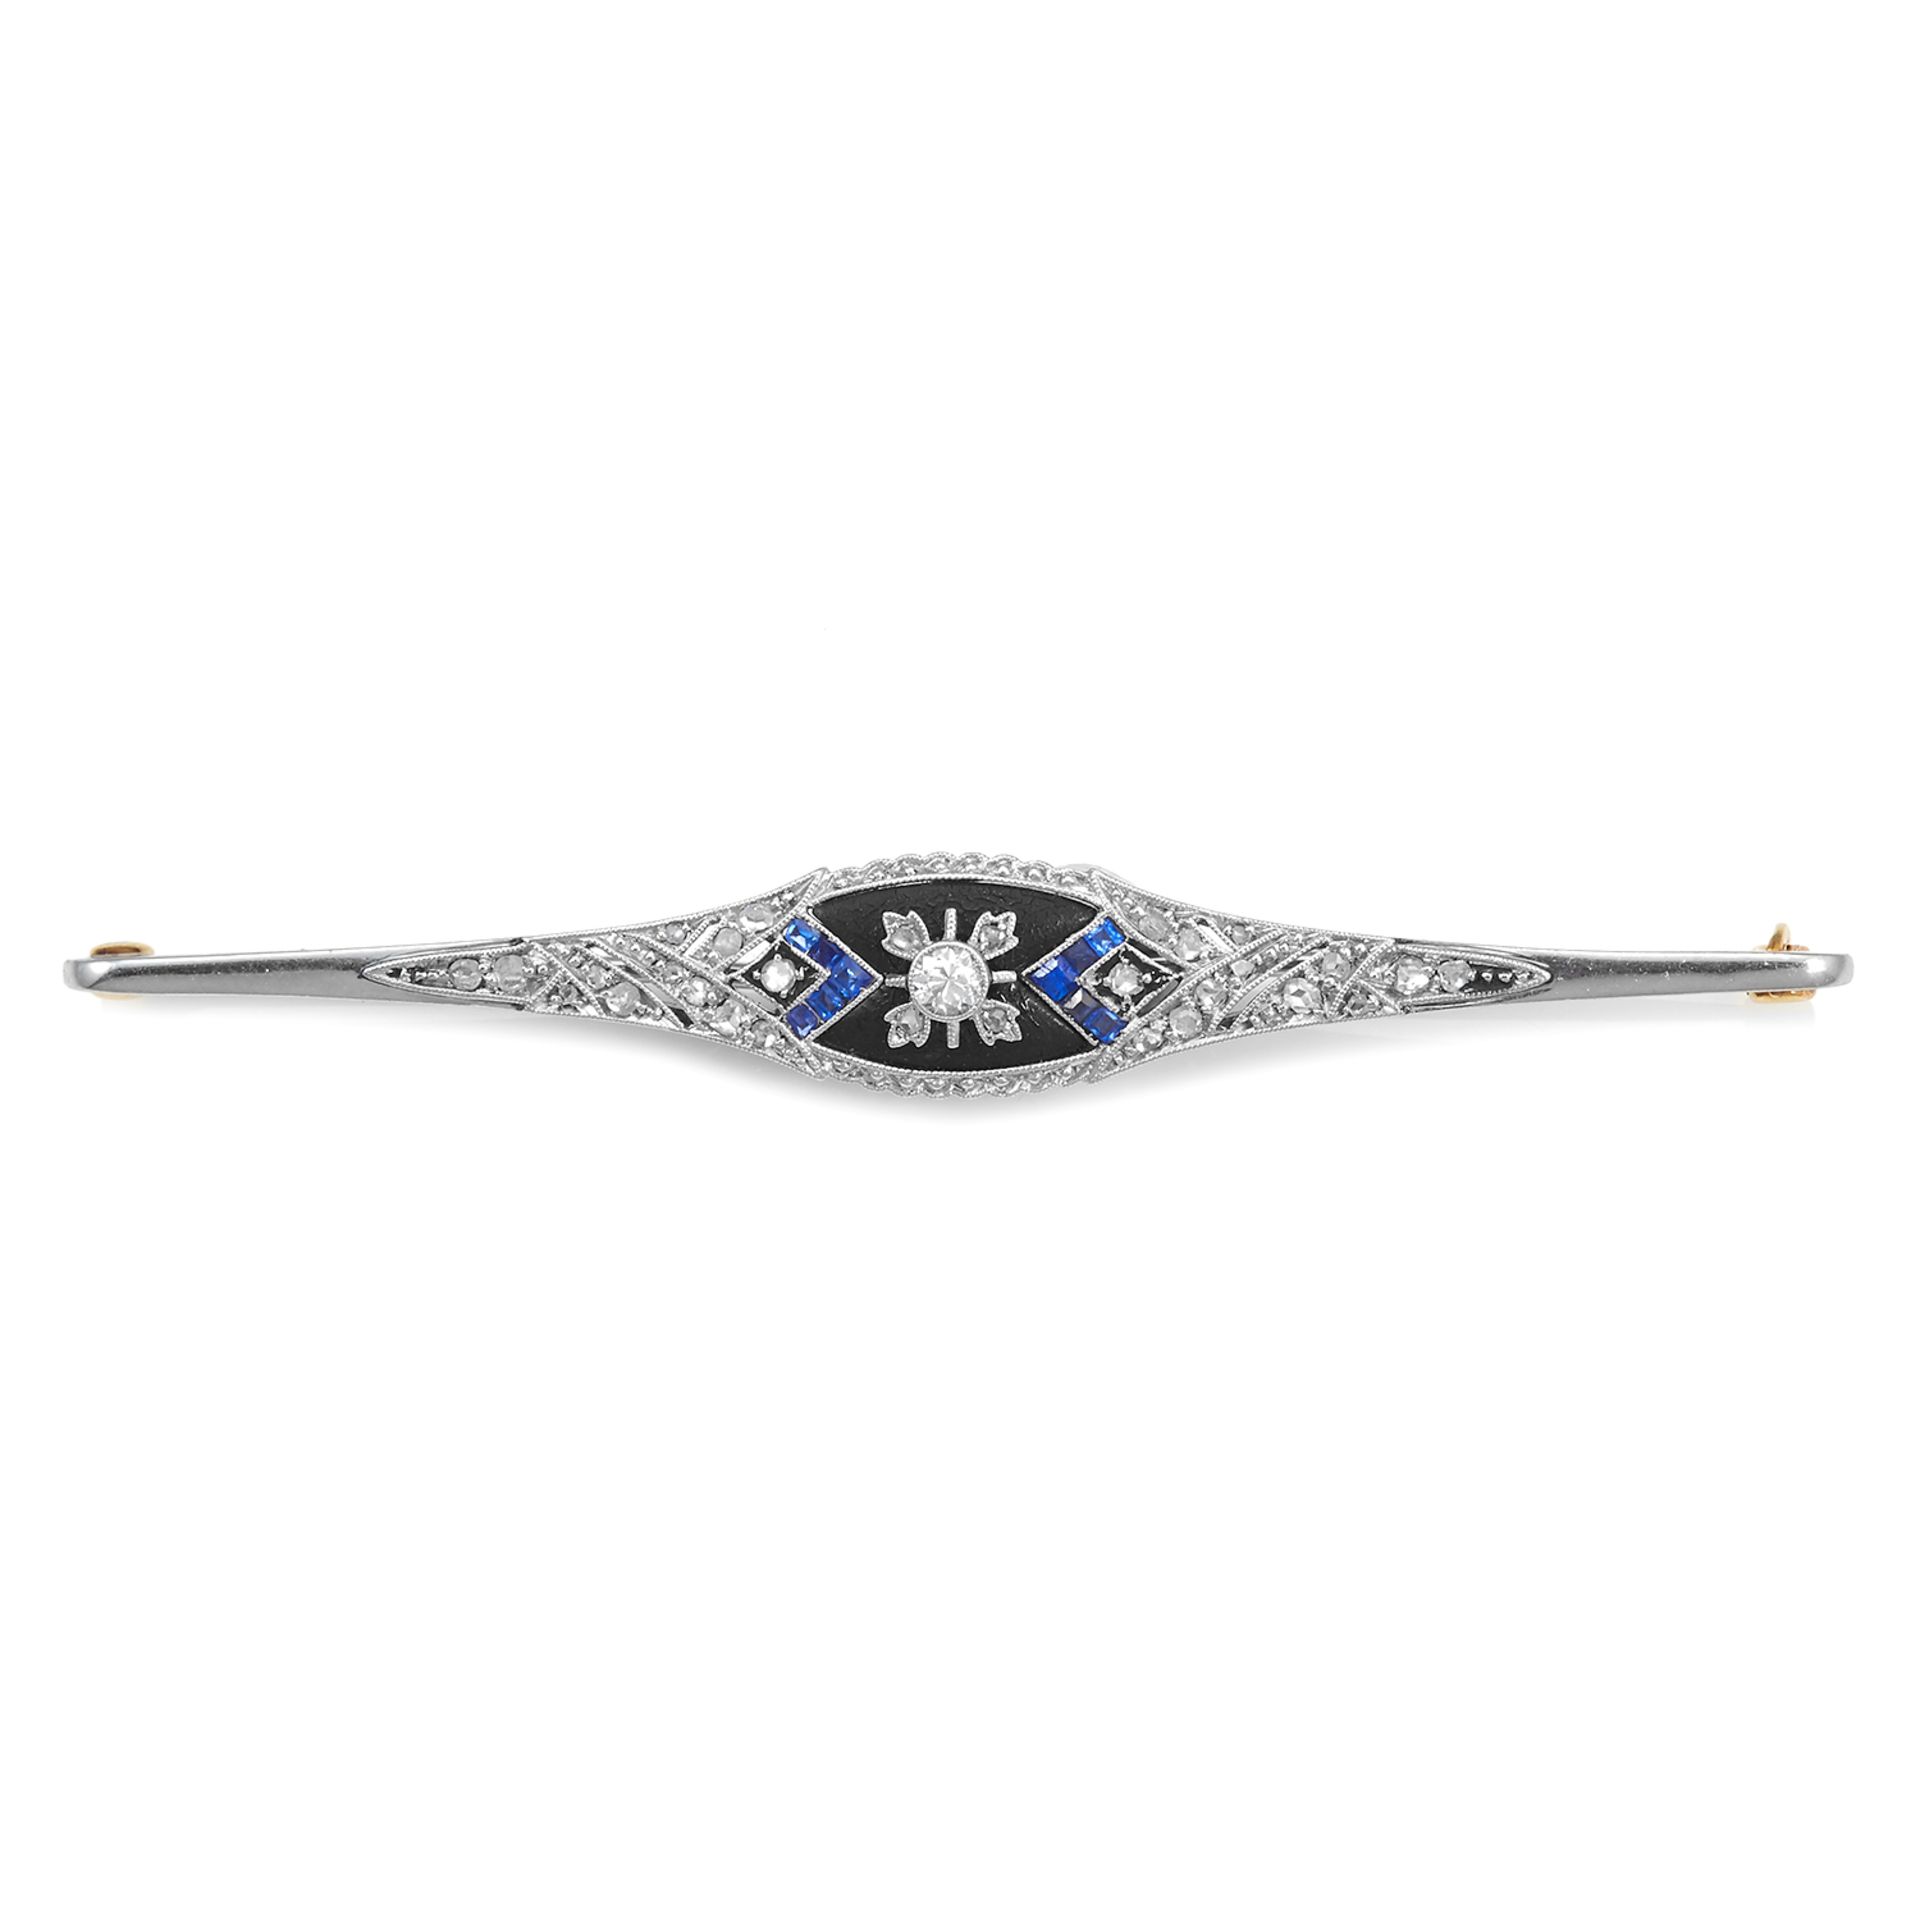 AN ART DECO ONYX, SAPPHIRE AND DIAMOND BAR BROOCH in high carat yellow gold and platinum, the